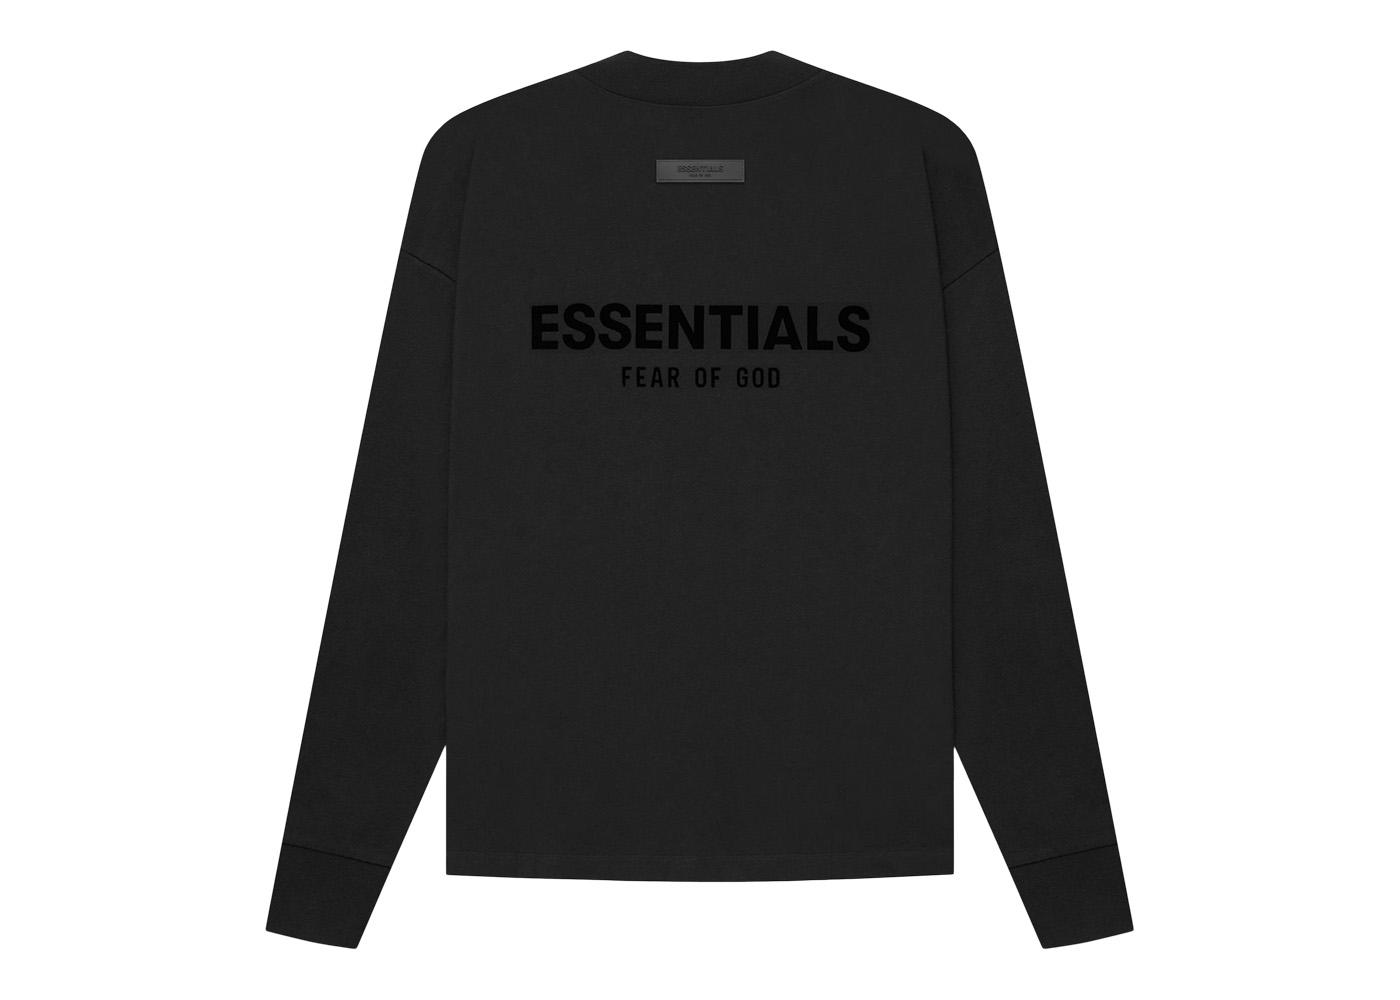 FEAR OF GOD  ESSENTIALS SS22 StretchLimo商品詳細